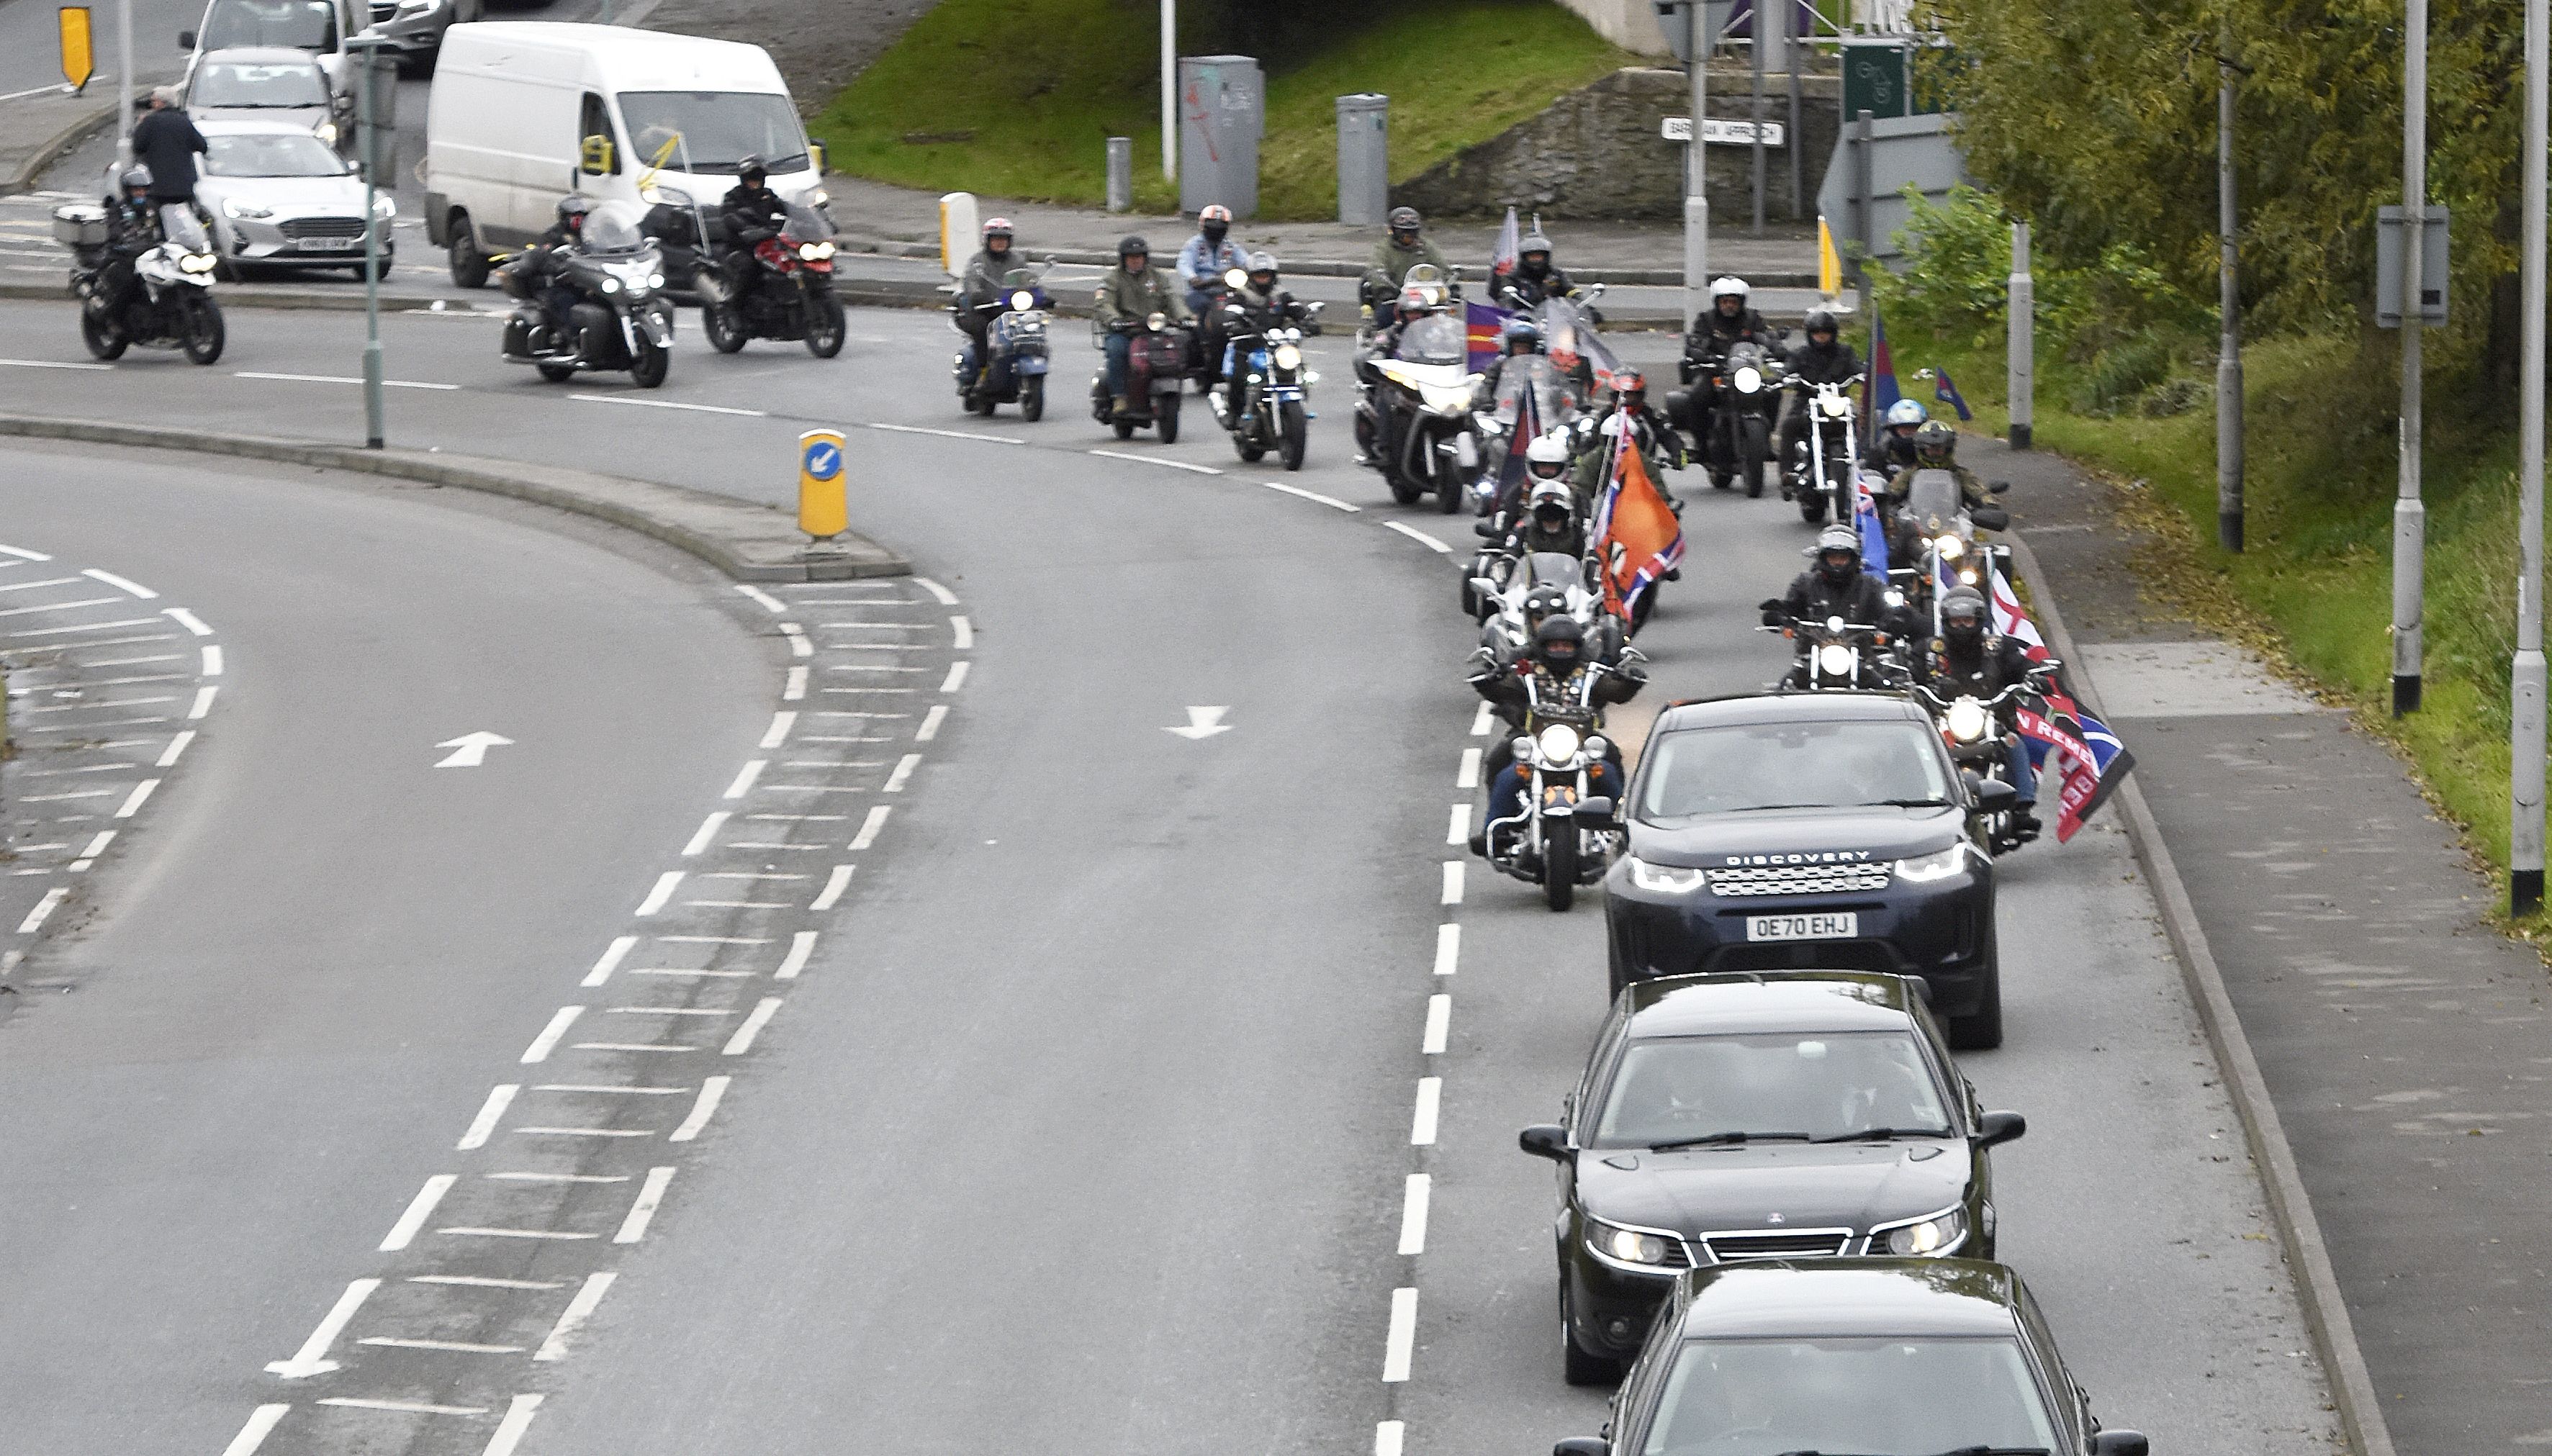 Riders from Rolling Thunder UK join the cortege towards St Andrew's Church in Plymouth for the funeral of Dennis Hutchings.